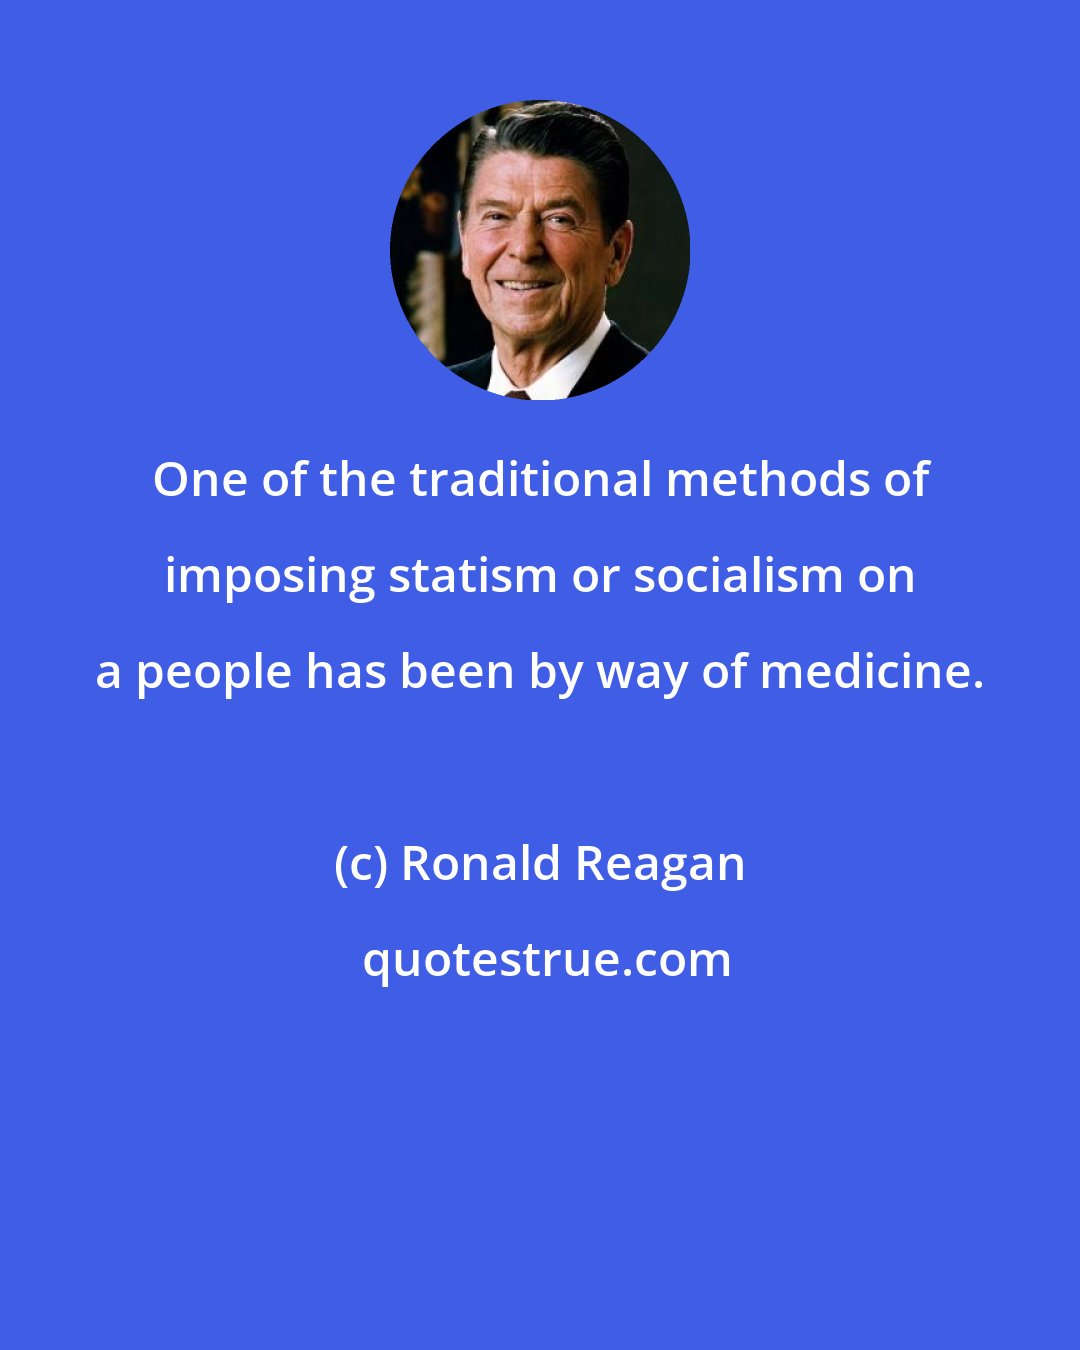 Ronald Reagan: One of the traditional methods of imposing statism or socialism on a people has been by way of medicine.